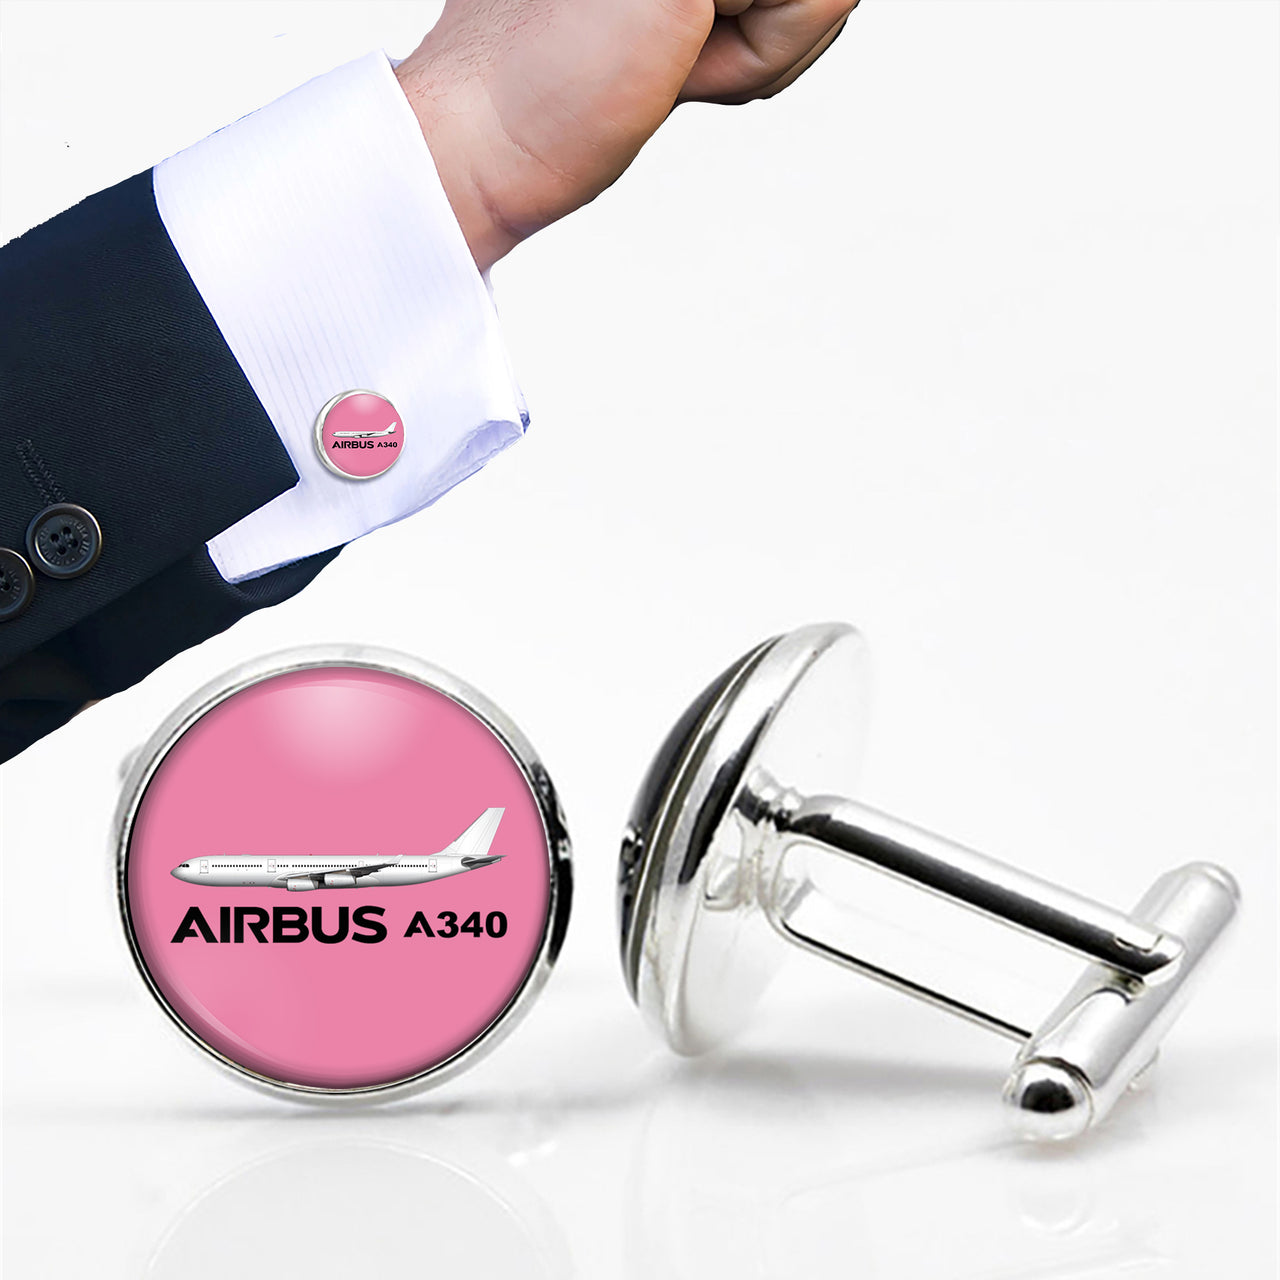 The Airbus A340 Designed Cuff Links